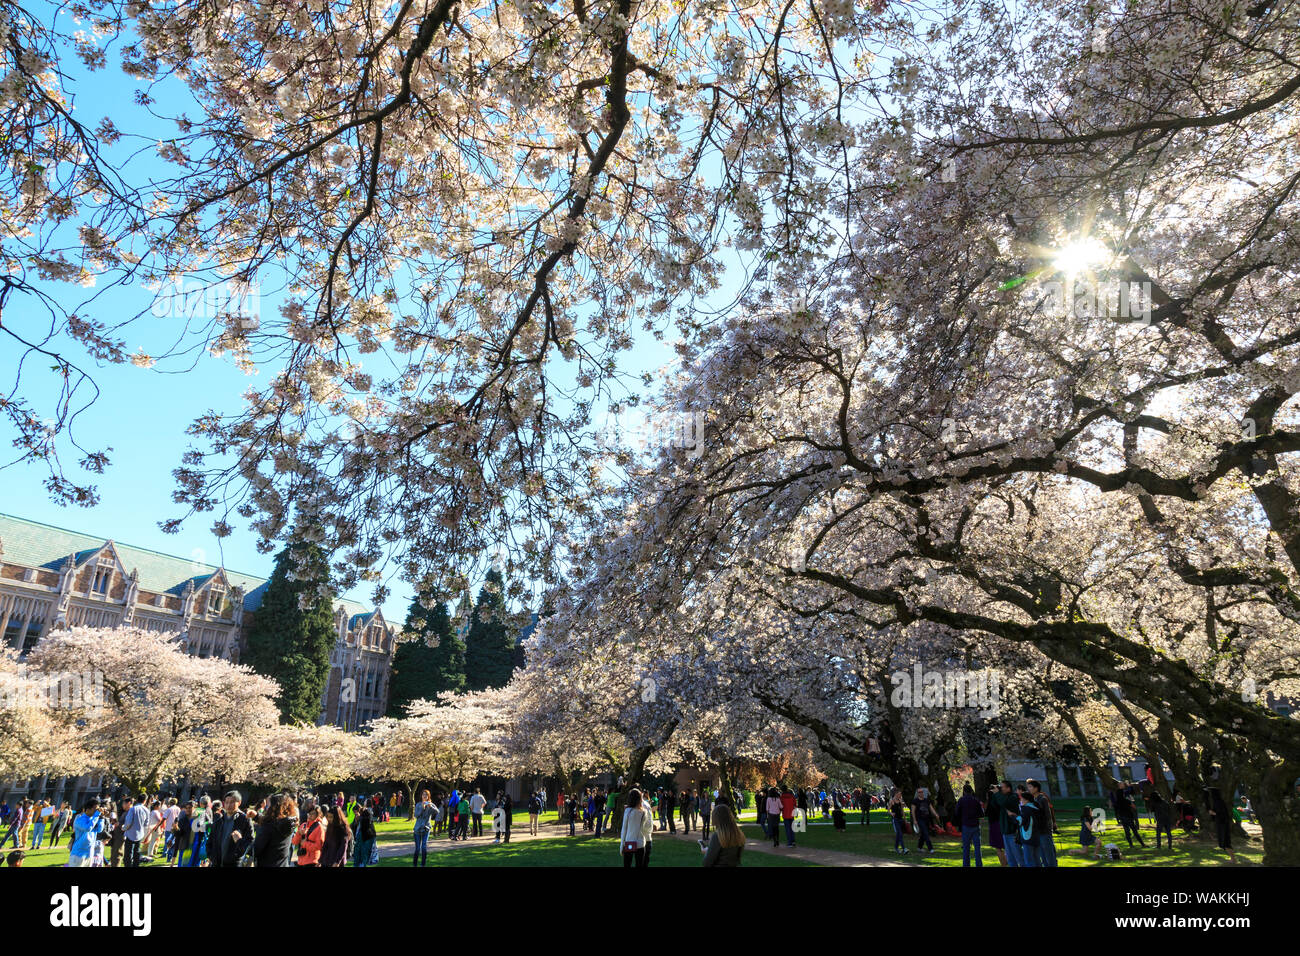 Cherry blossoms in full bloom, University of Washington campus, Seattle, Washington State, USA (Editorial Use Only) Stock Photo